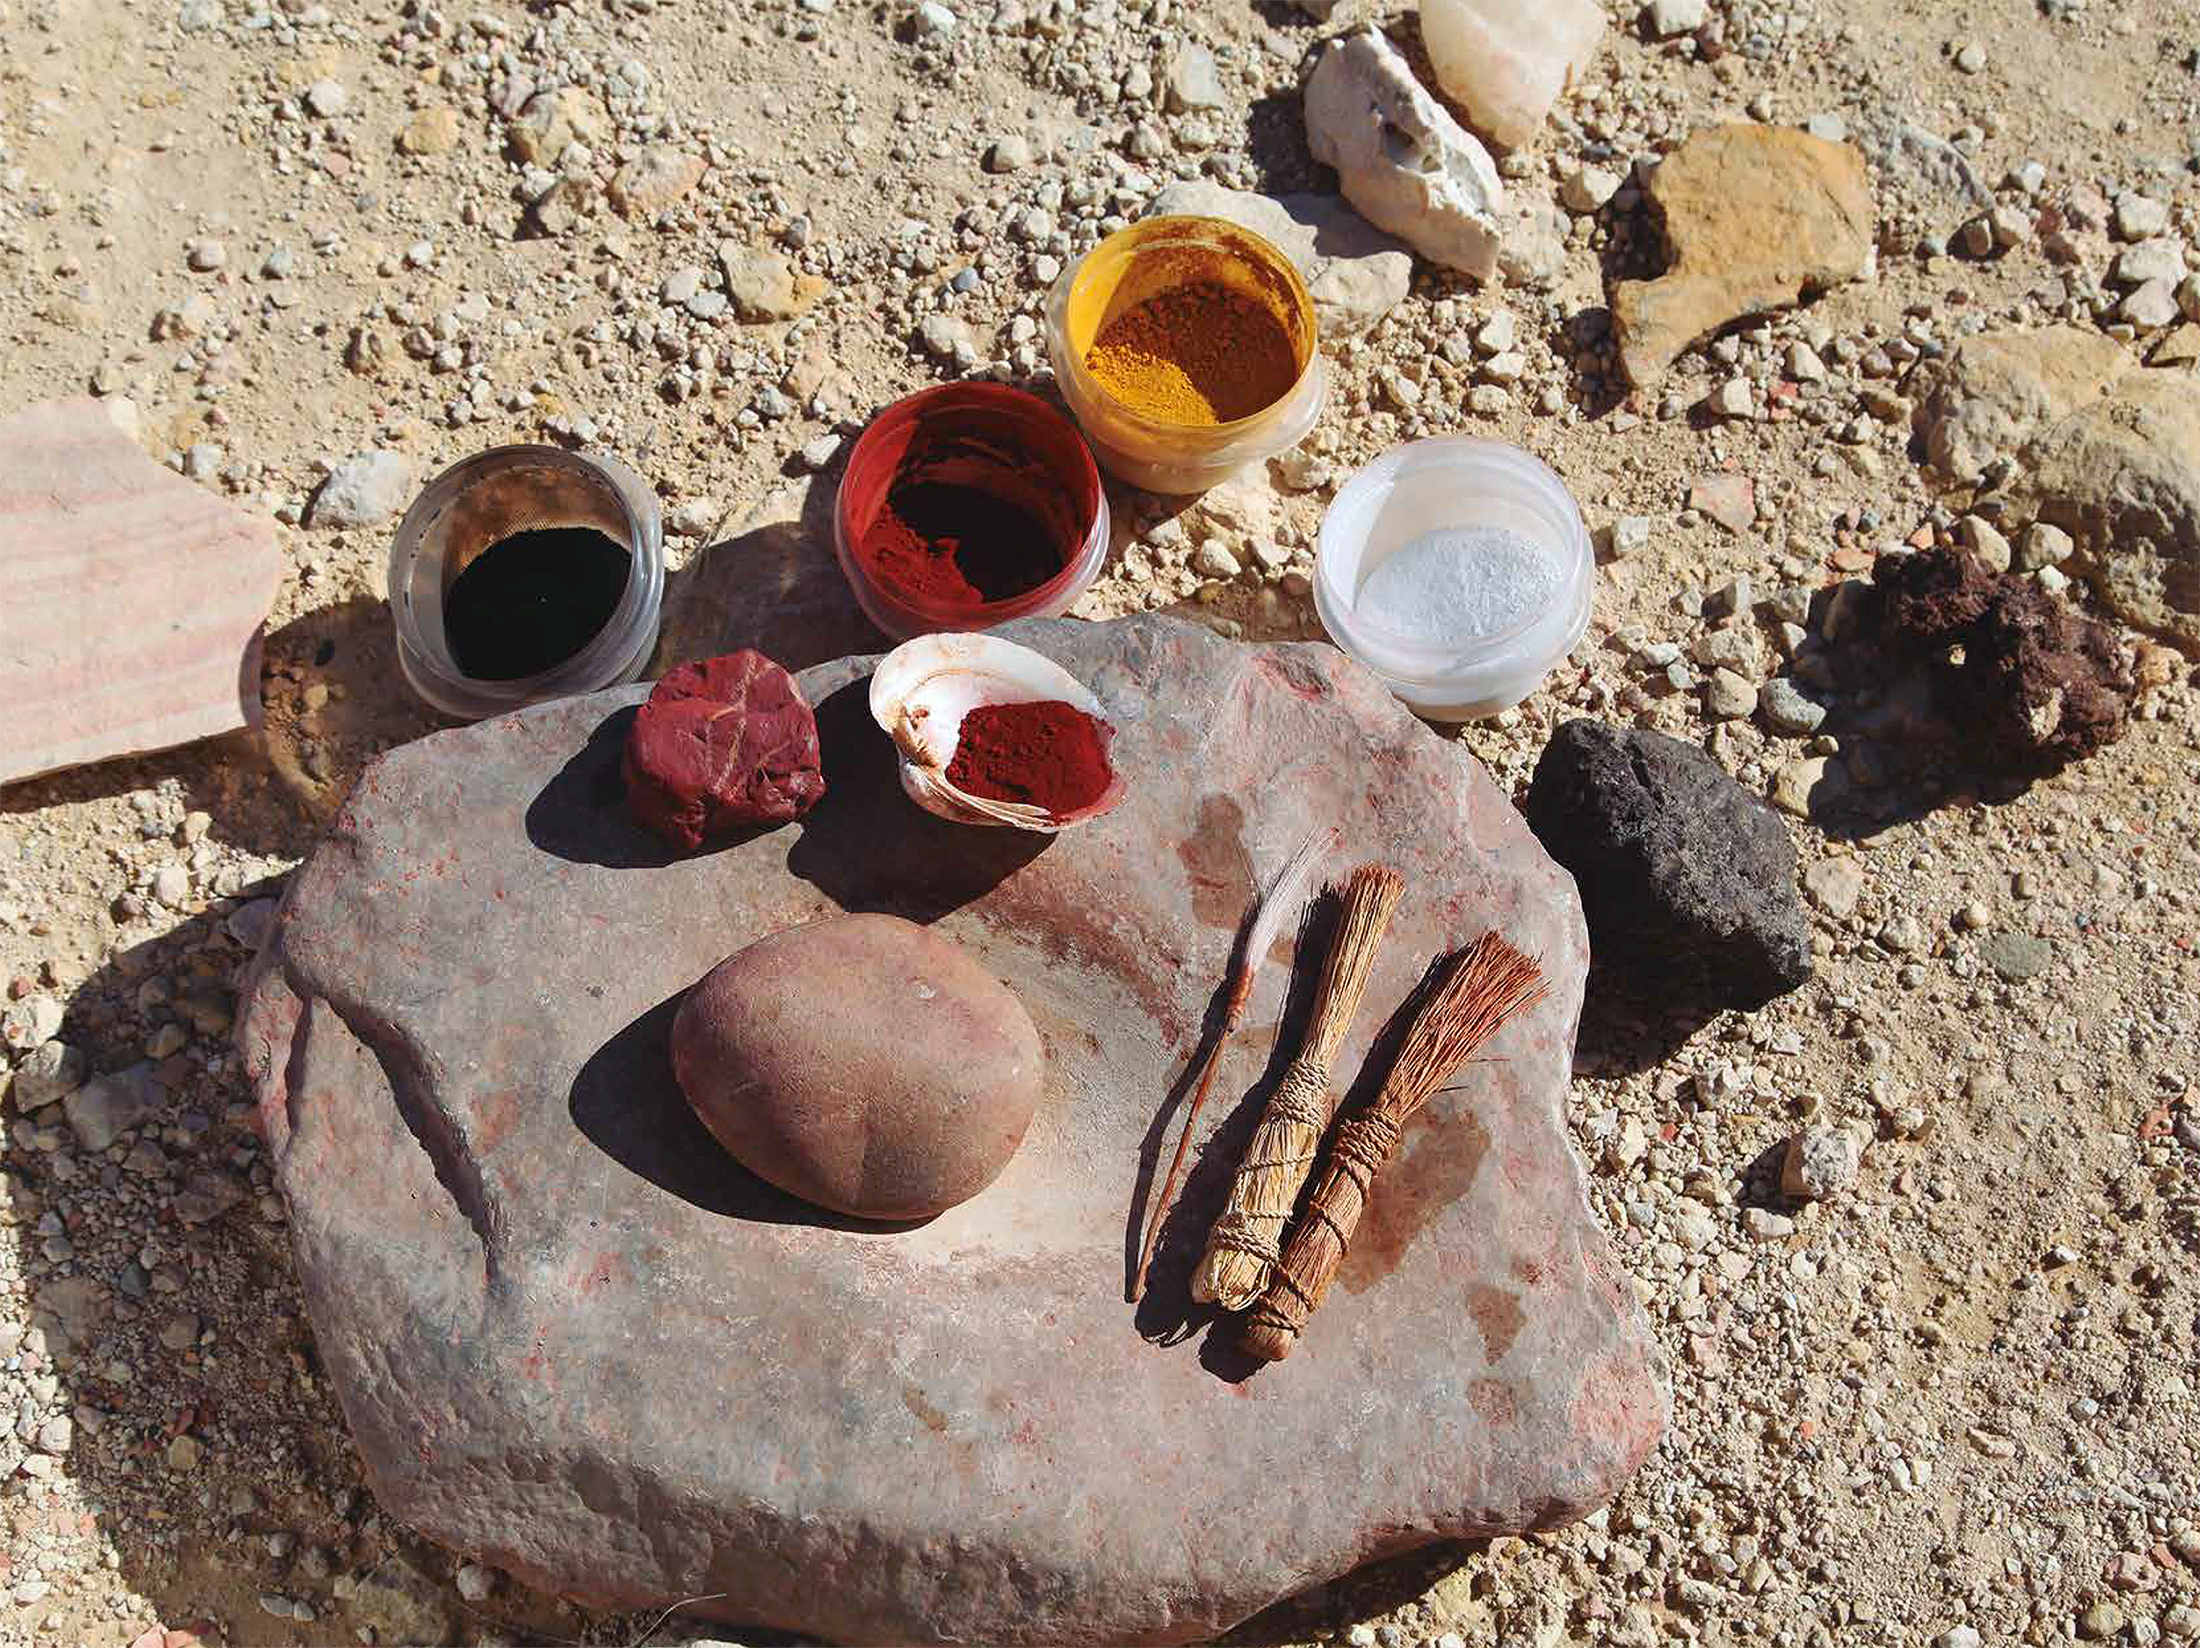 Grinding stone, mineral pigments, and brushes made from fiber and animal hair used in experimental paint-making